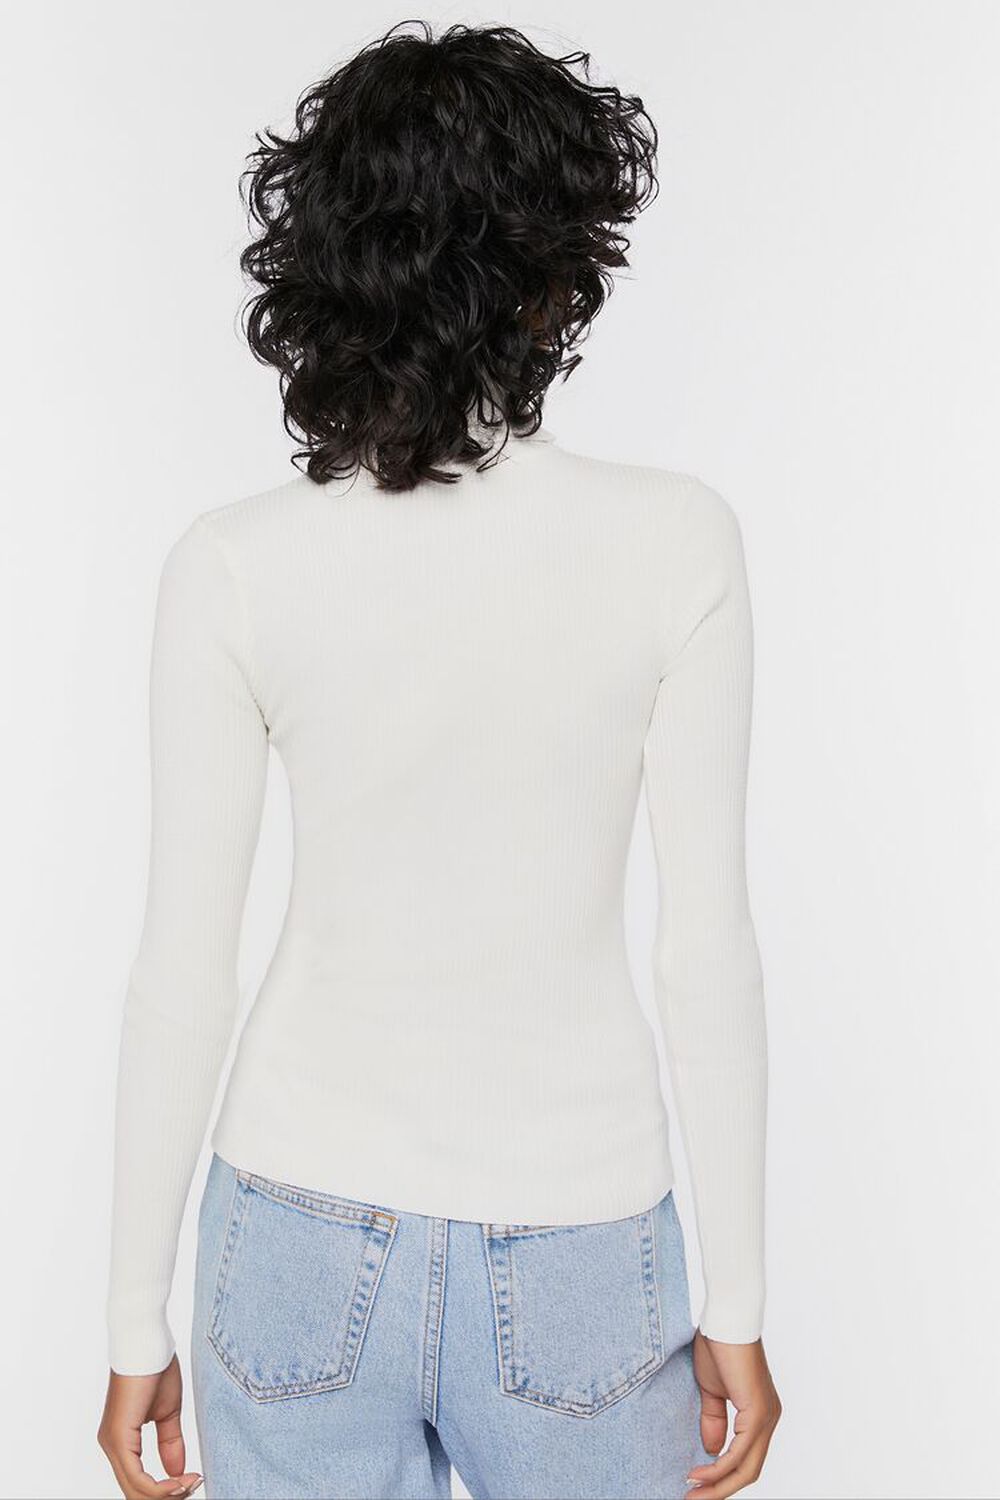 WHITE Ribbed Turtleneck Sweater-Knit Top, image 3